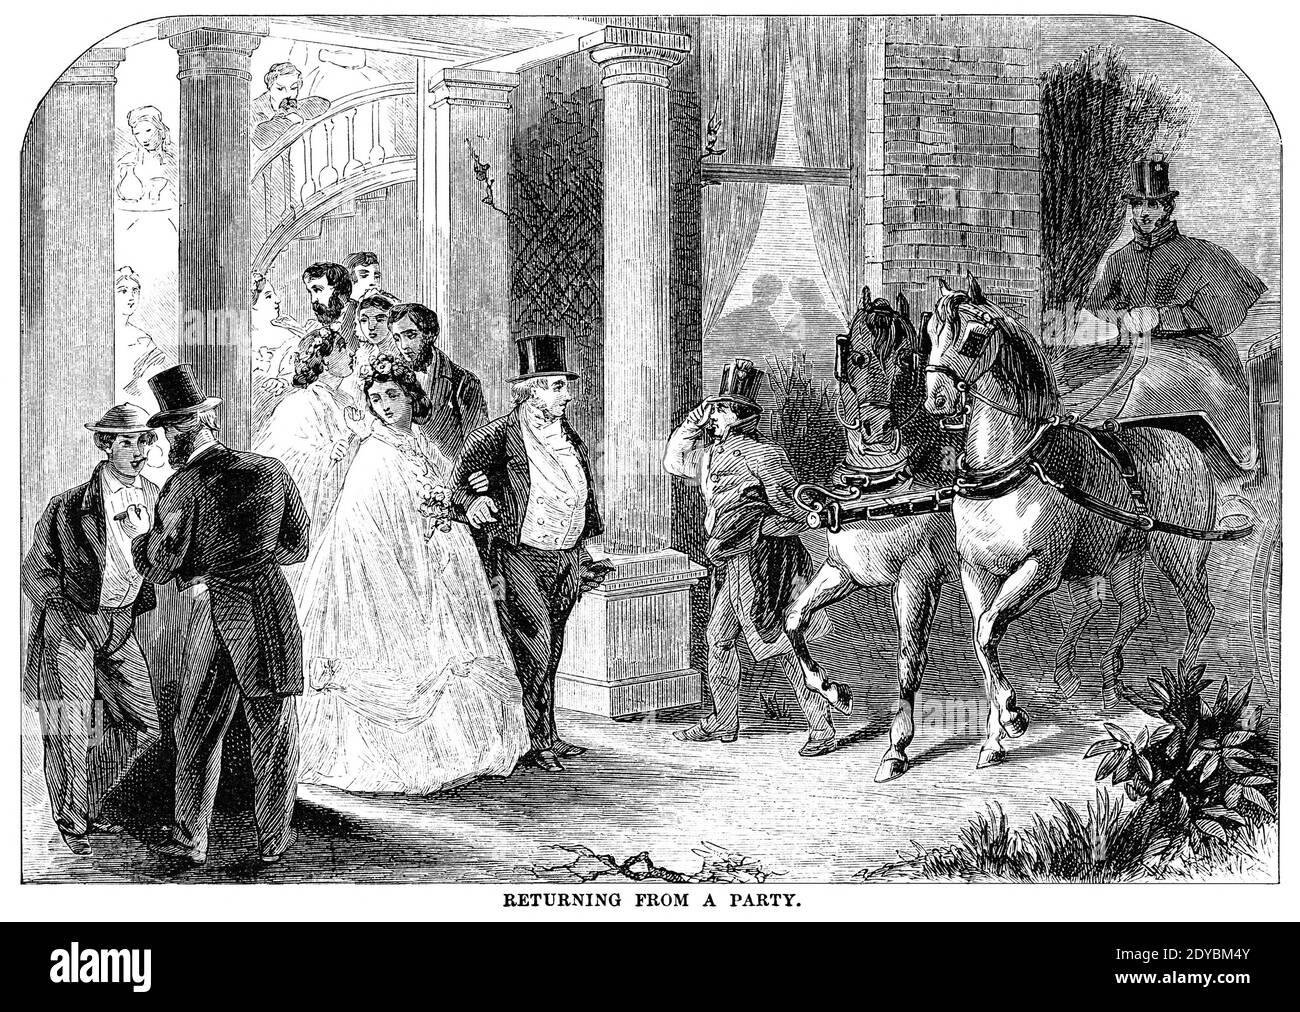 Returning from a Party From Godey's Lady's Book and Magazine, January 1864, Philadelphia, Louis A. Godey, Sarah Josepha Hale, Stock Photo